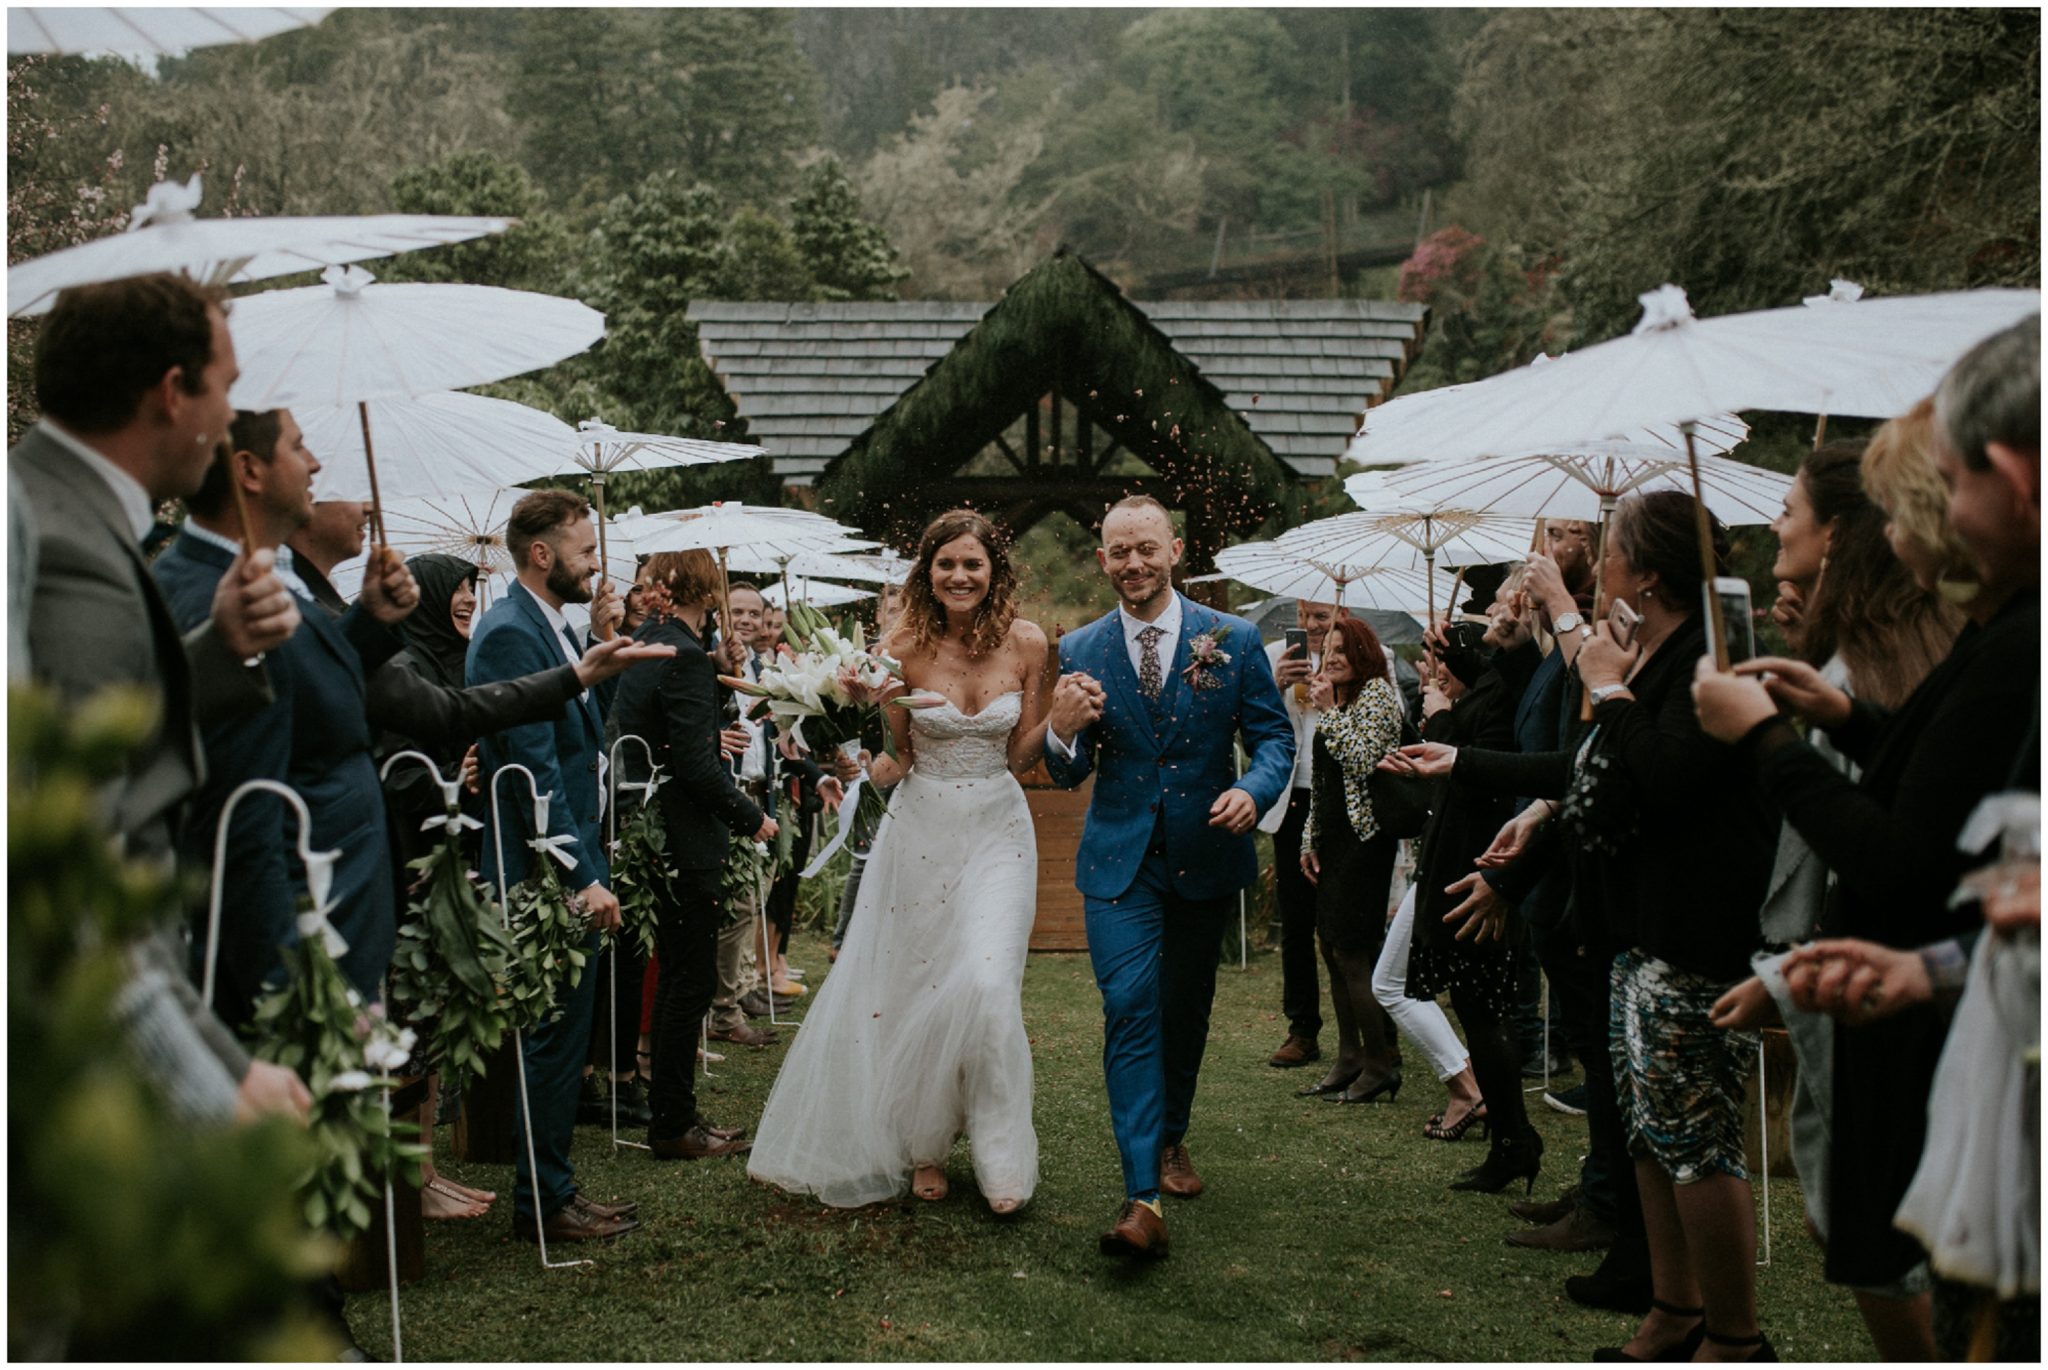 Maryke Albertyn Photography Best Award Winning Destination Wedding Photographer from Johannesburg with Fine Art Documentary approach for Alternative Bohemian and Destination Couples in Magoebaskloof Cheerio Gardens Most Forest Outdoor Ceremony